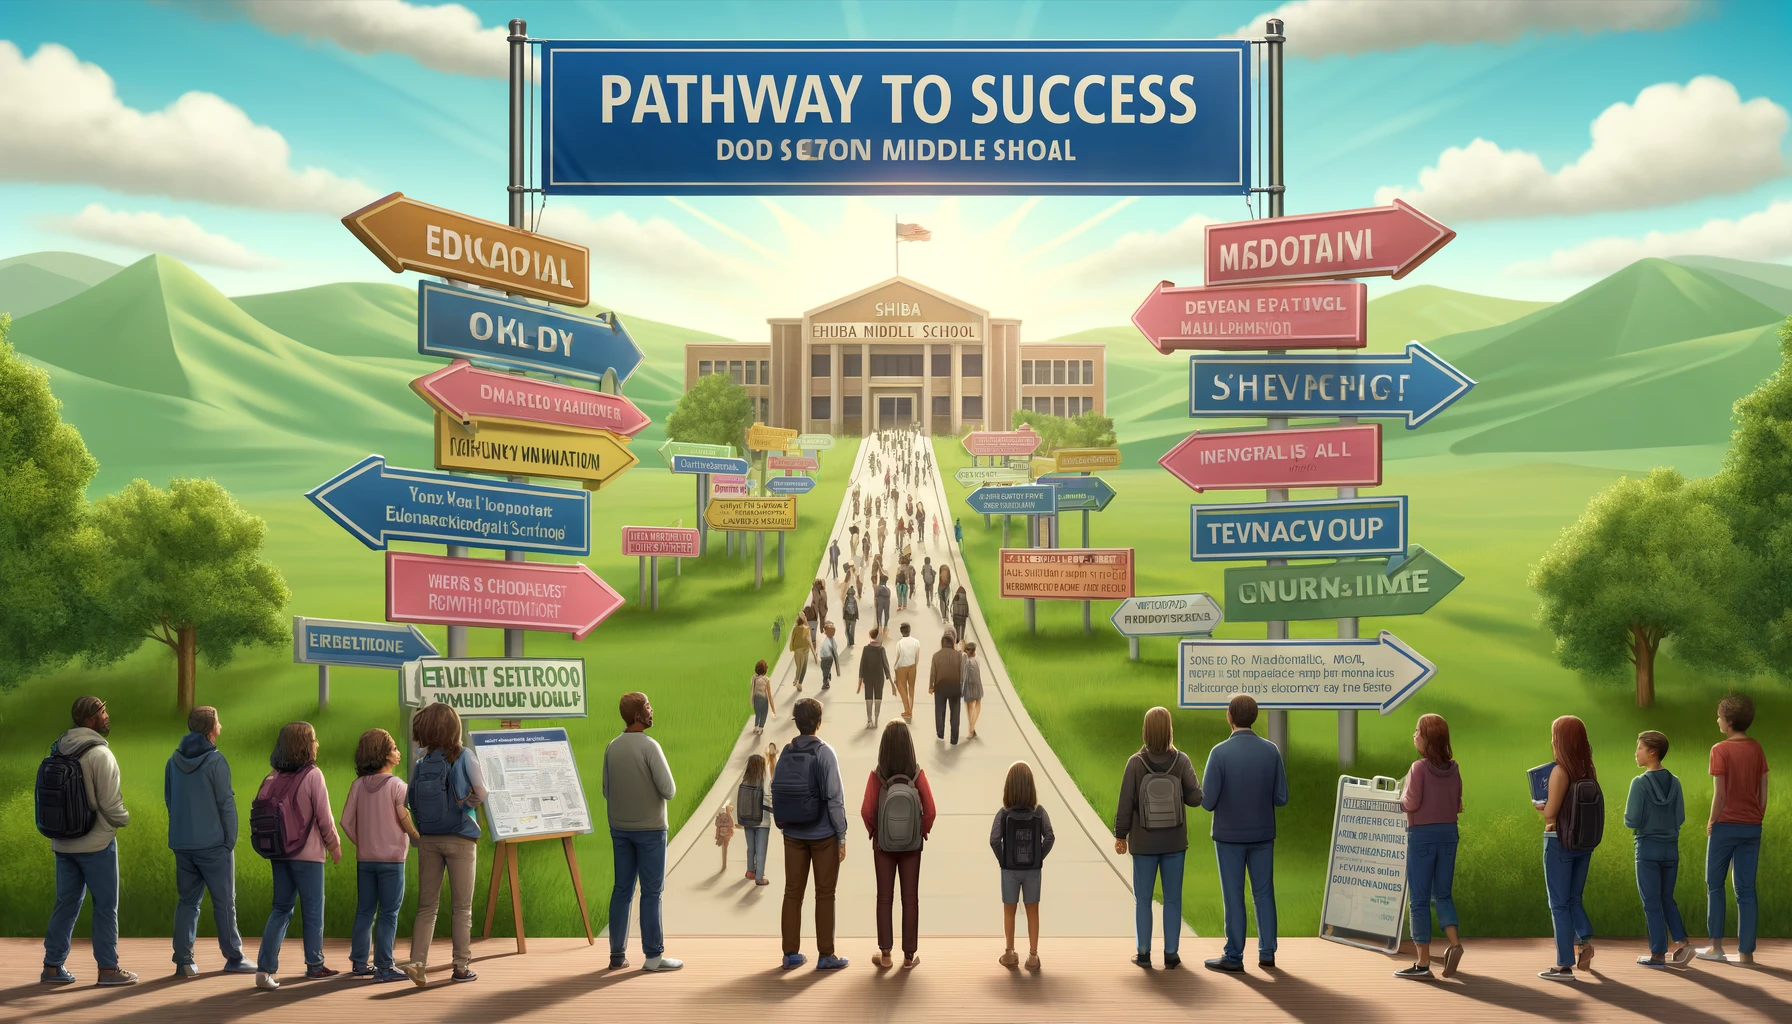 A motivational scene showing a pathway to success for prospective students aiming to enroll at SHIBA middle school. The image depicts a metaphorical road lined with educational milestones and inspirational banners, leading up to the grand entrance of SHIBA middle school. Diverse students and parents are walking along this path, viewing information boards and engaging with school representatives. The school's name 'SHIBA' is prominently featured throughout the scene.